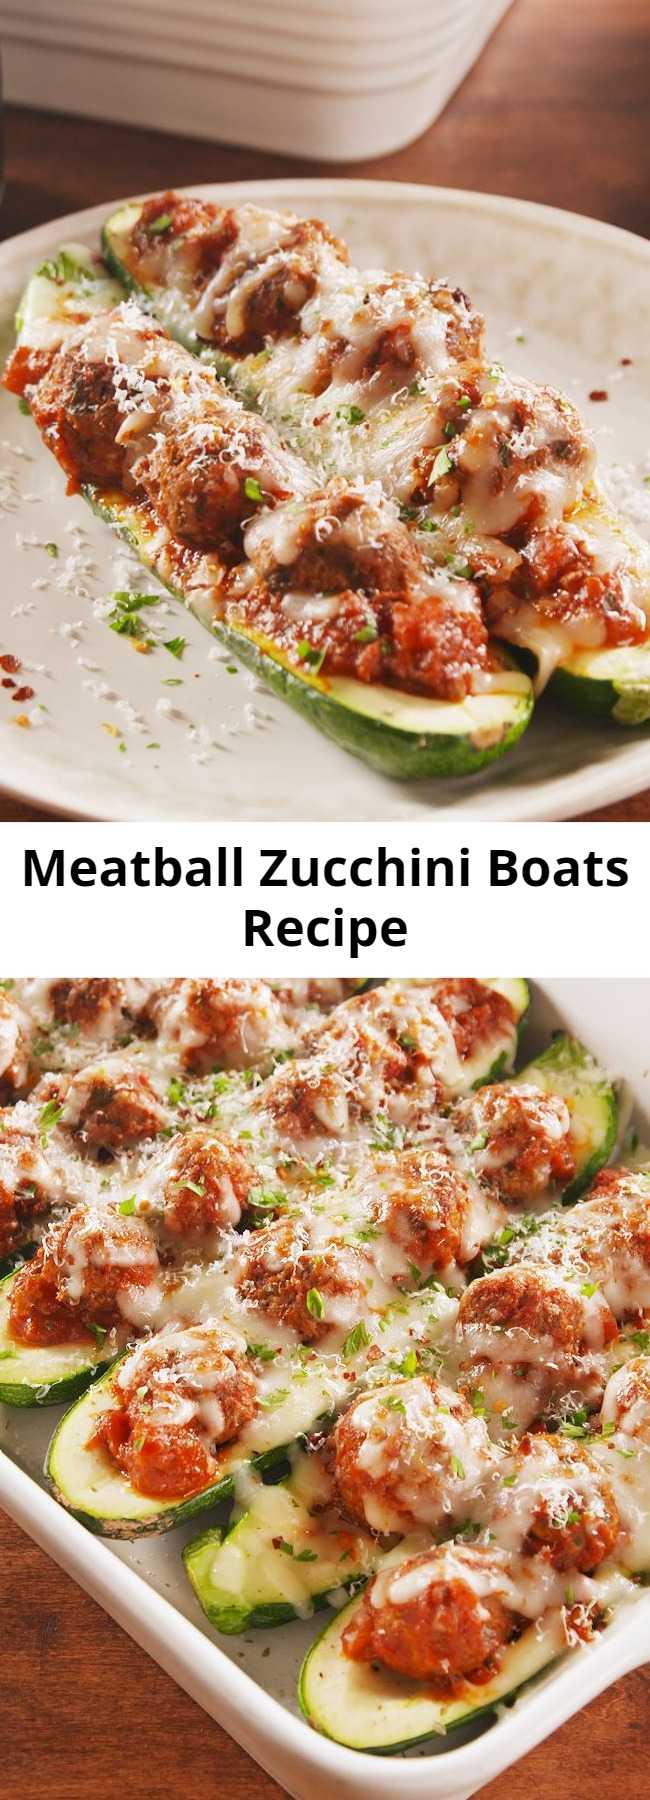 Meatball Zucchini Boats Recipe - Meatball Zucchini Boats are the low-carb, high-protein way to eat a meatball sub. Want to go even MORE low-cal? Try these with ground turkey or chicken instead! #healthyrecipes #easyrecipes #meatballs #zuccchiniboats